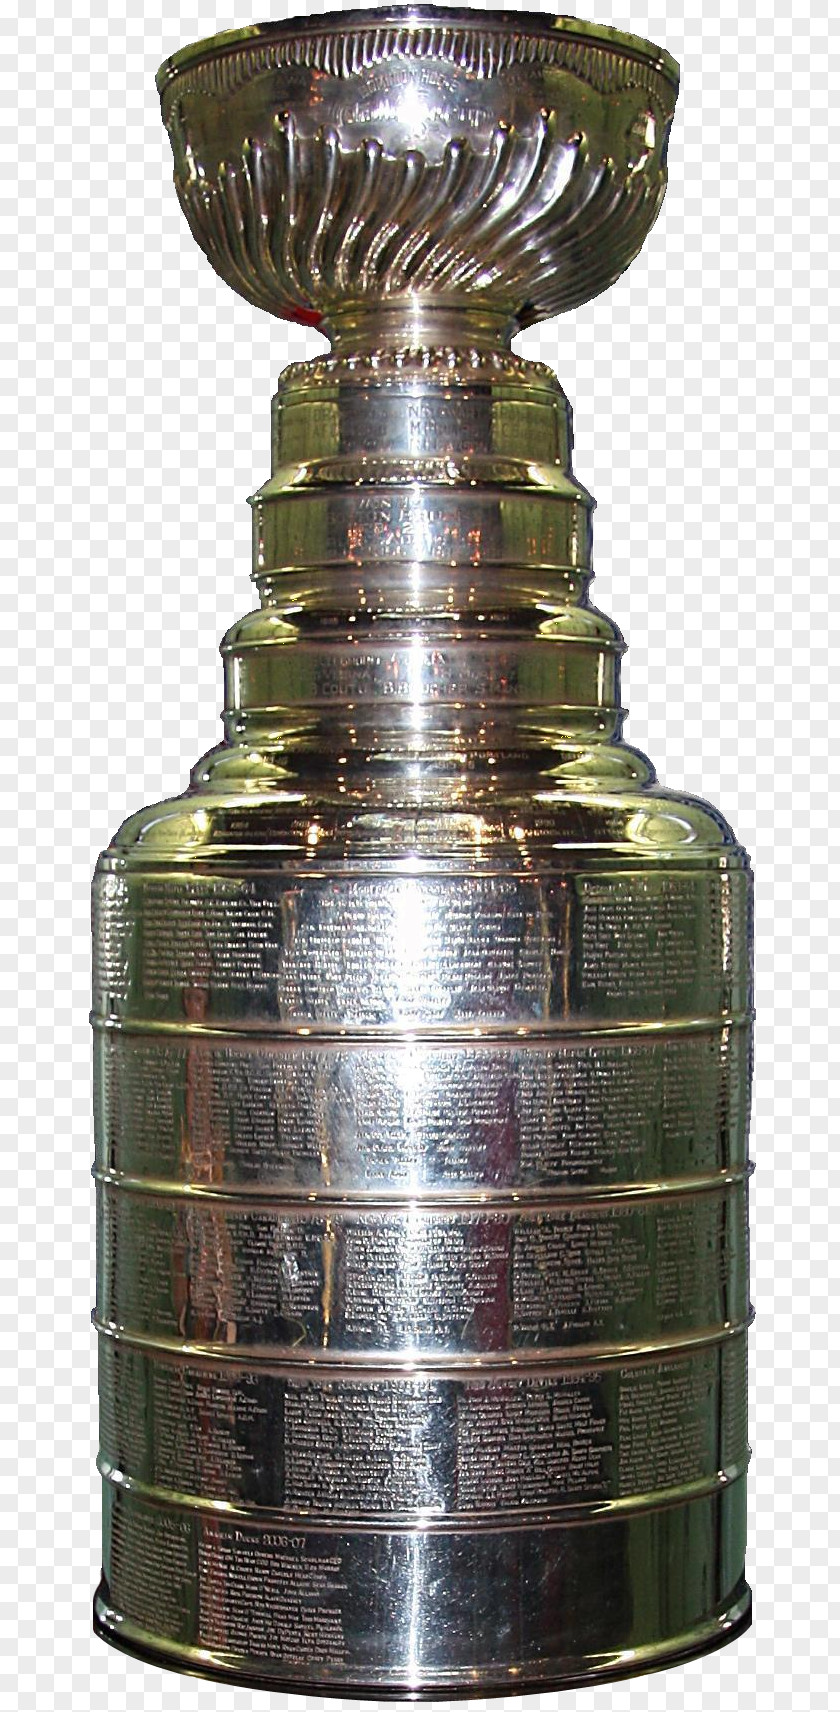 Trophy 2017 Stanley Cup Playoffs 2015 Finals National Hockey League 2013 PNG